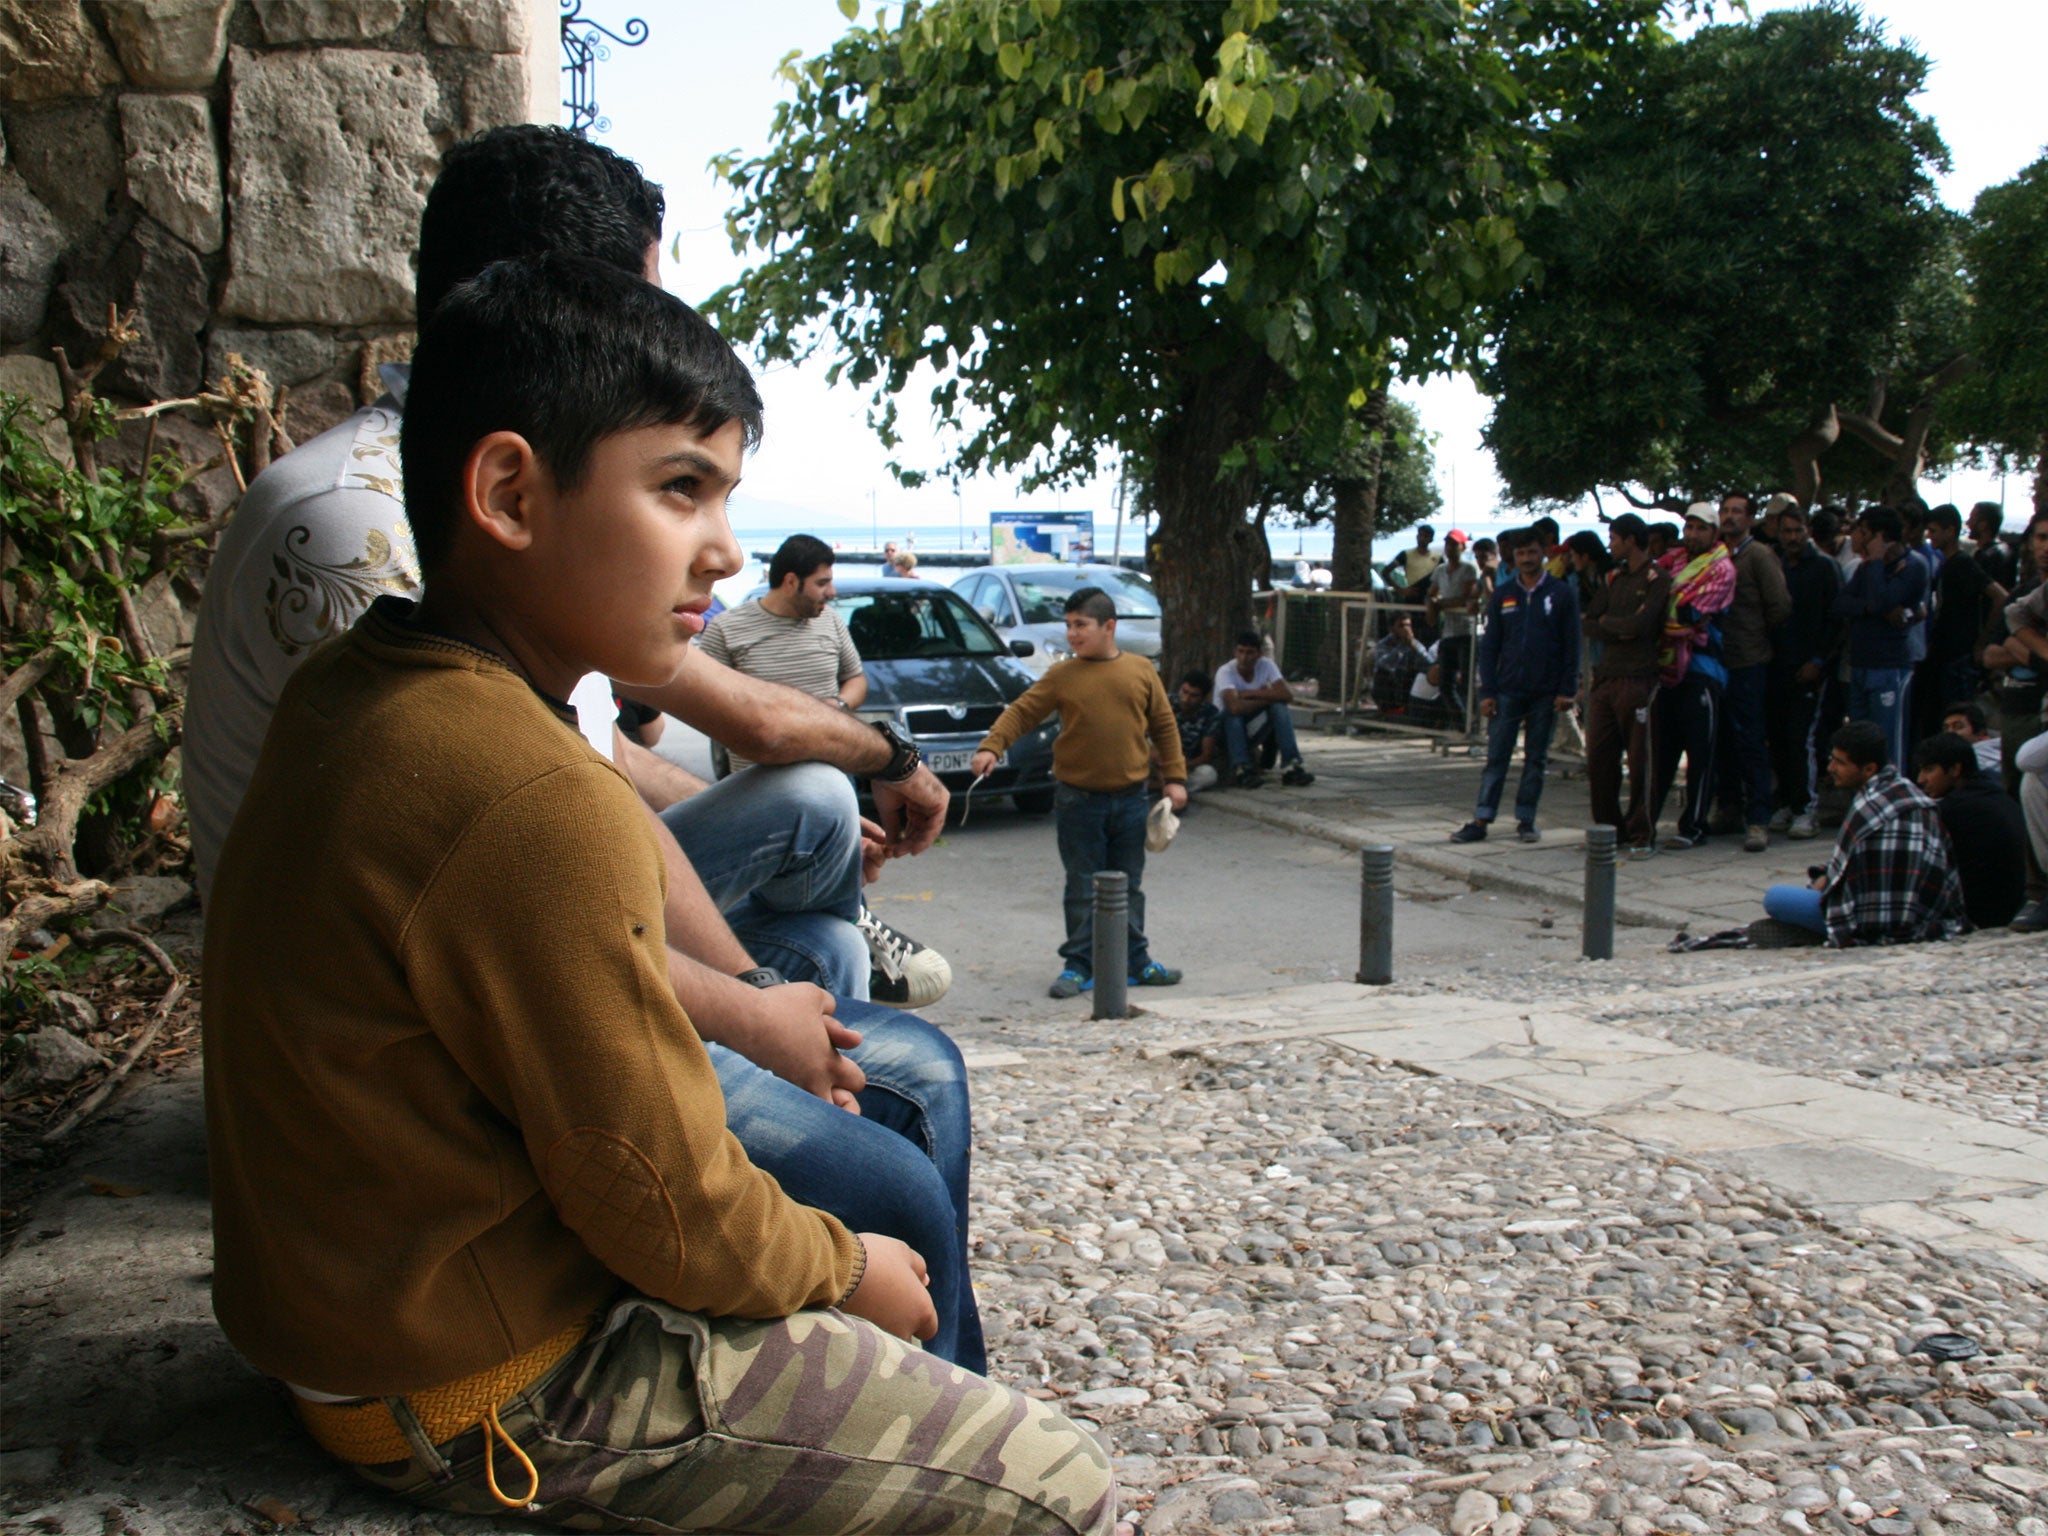 &#13;
A young Pakistani and his family wait on the curb outside the downtown Kos police station where refugees must register upon arrival on the island (Photo by Cody Punter)&#13;